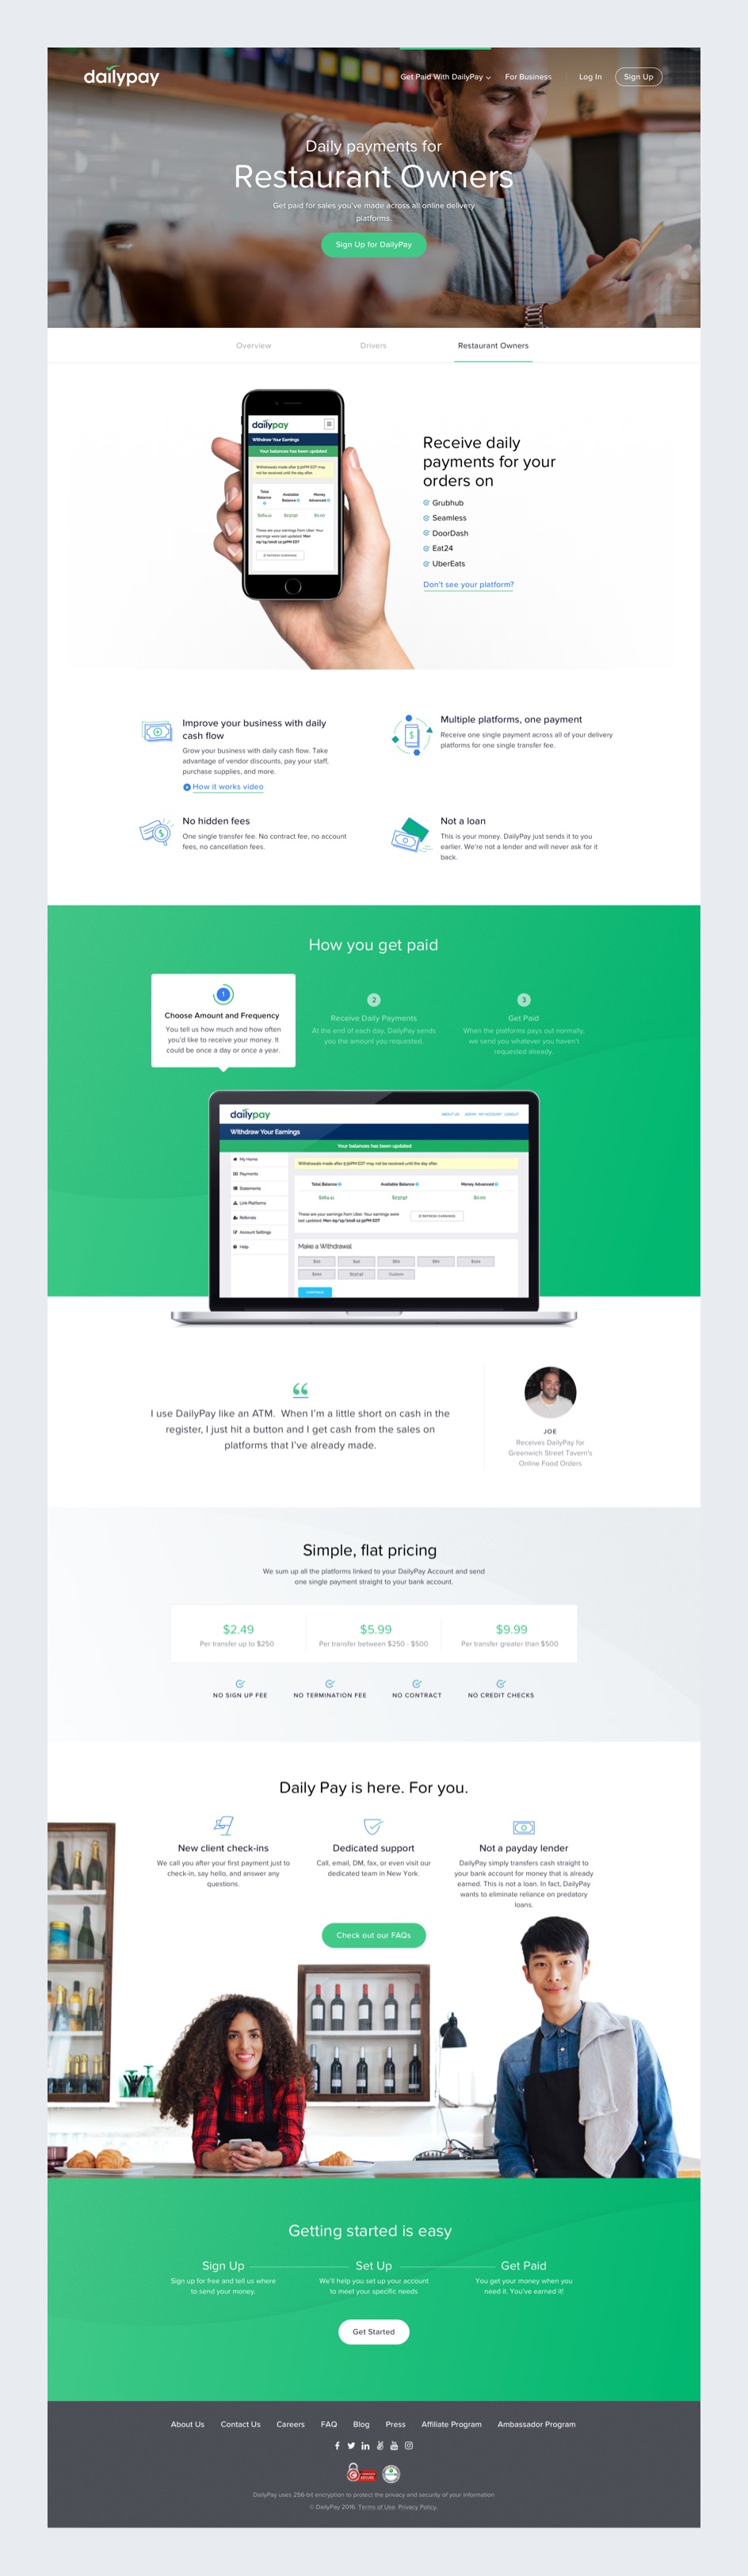 Restaurant Owners Page Design for DailyPay